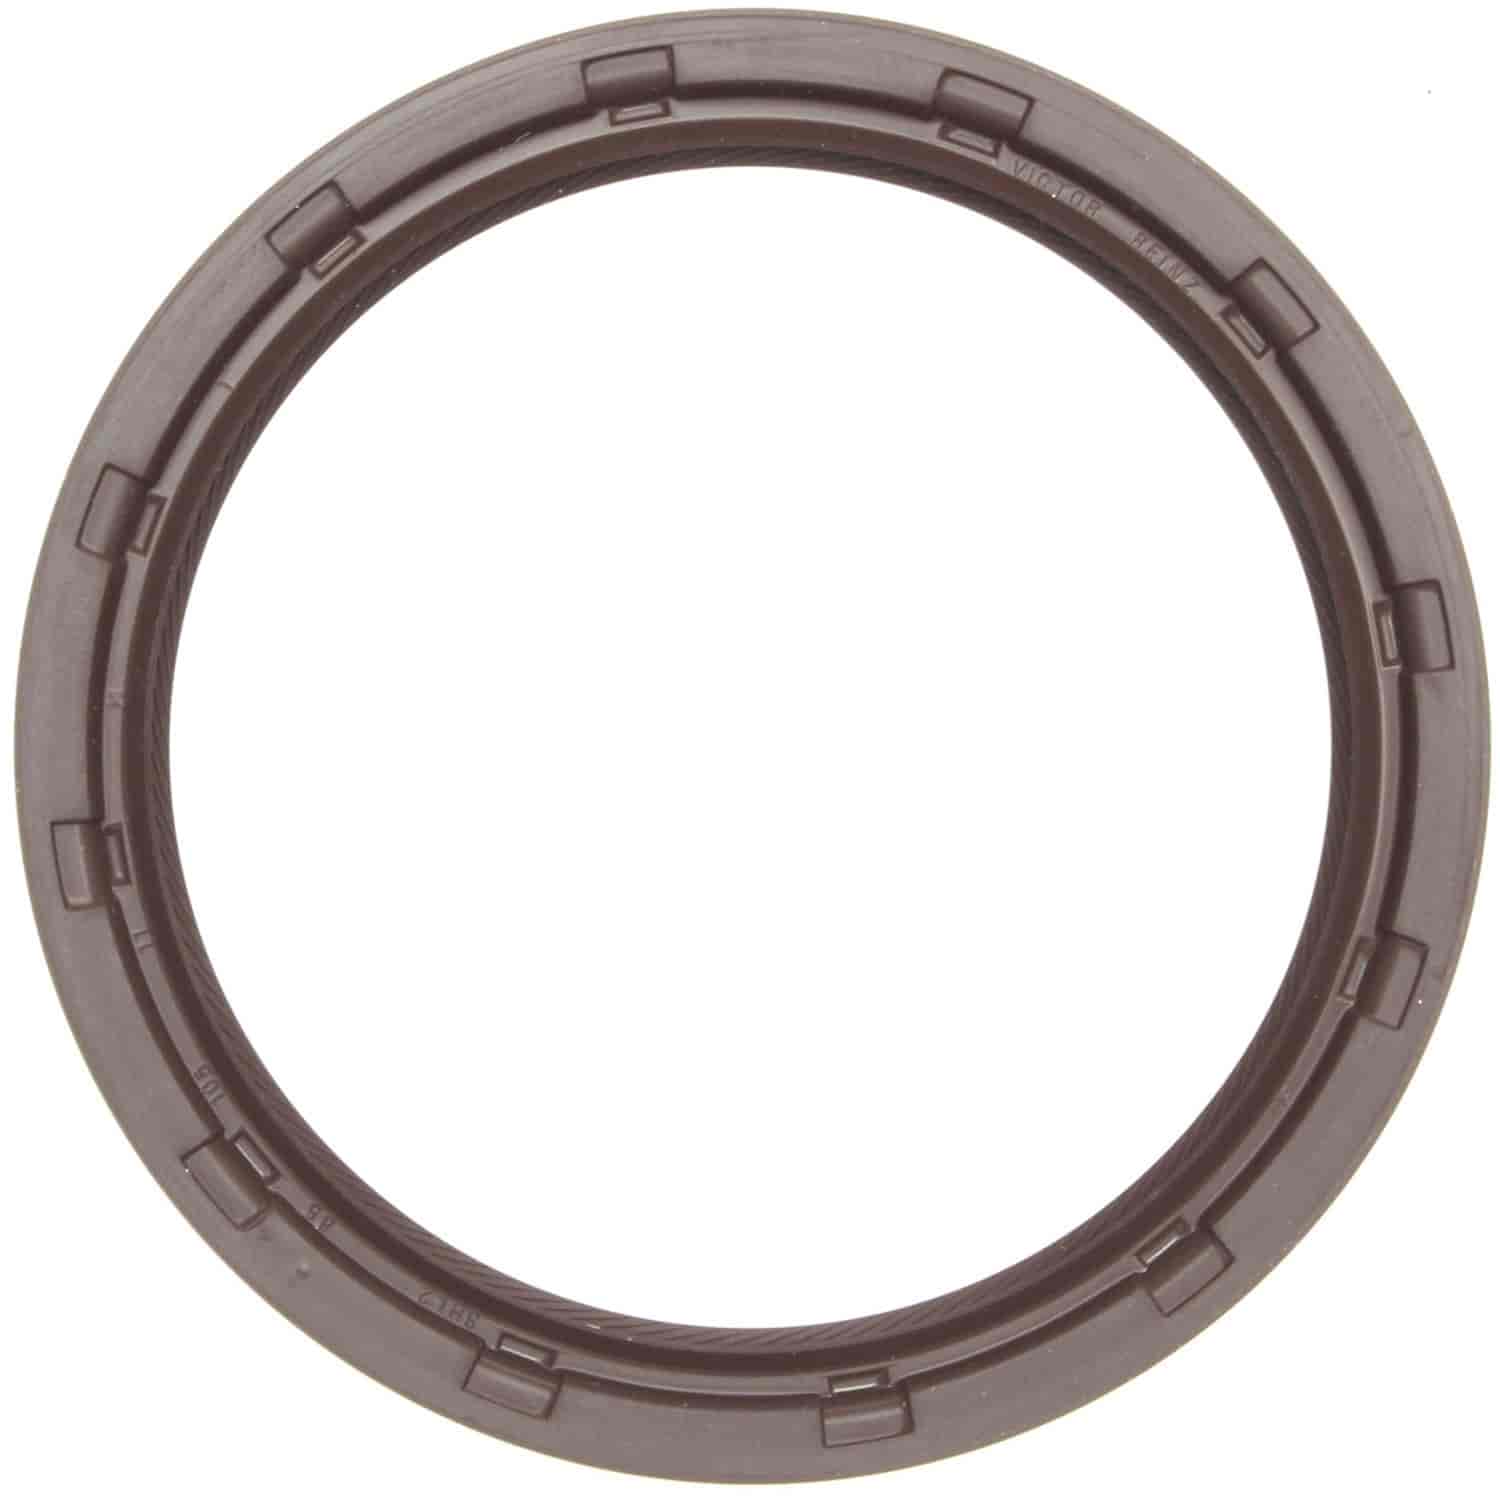 Oil Seal Volkswagen VR6 6Cyl 2.8L from engine #0